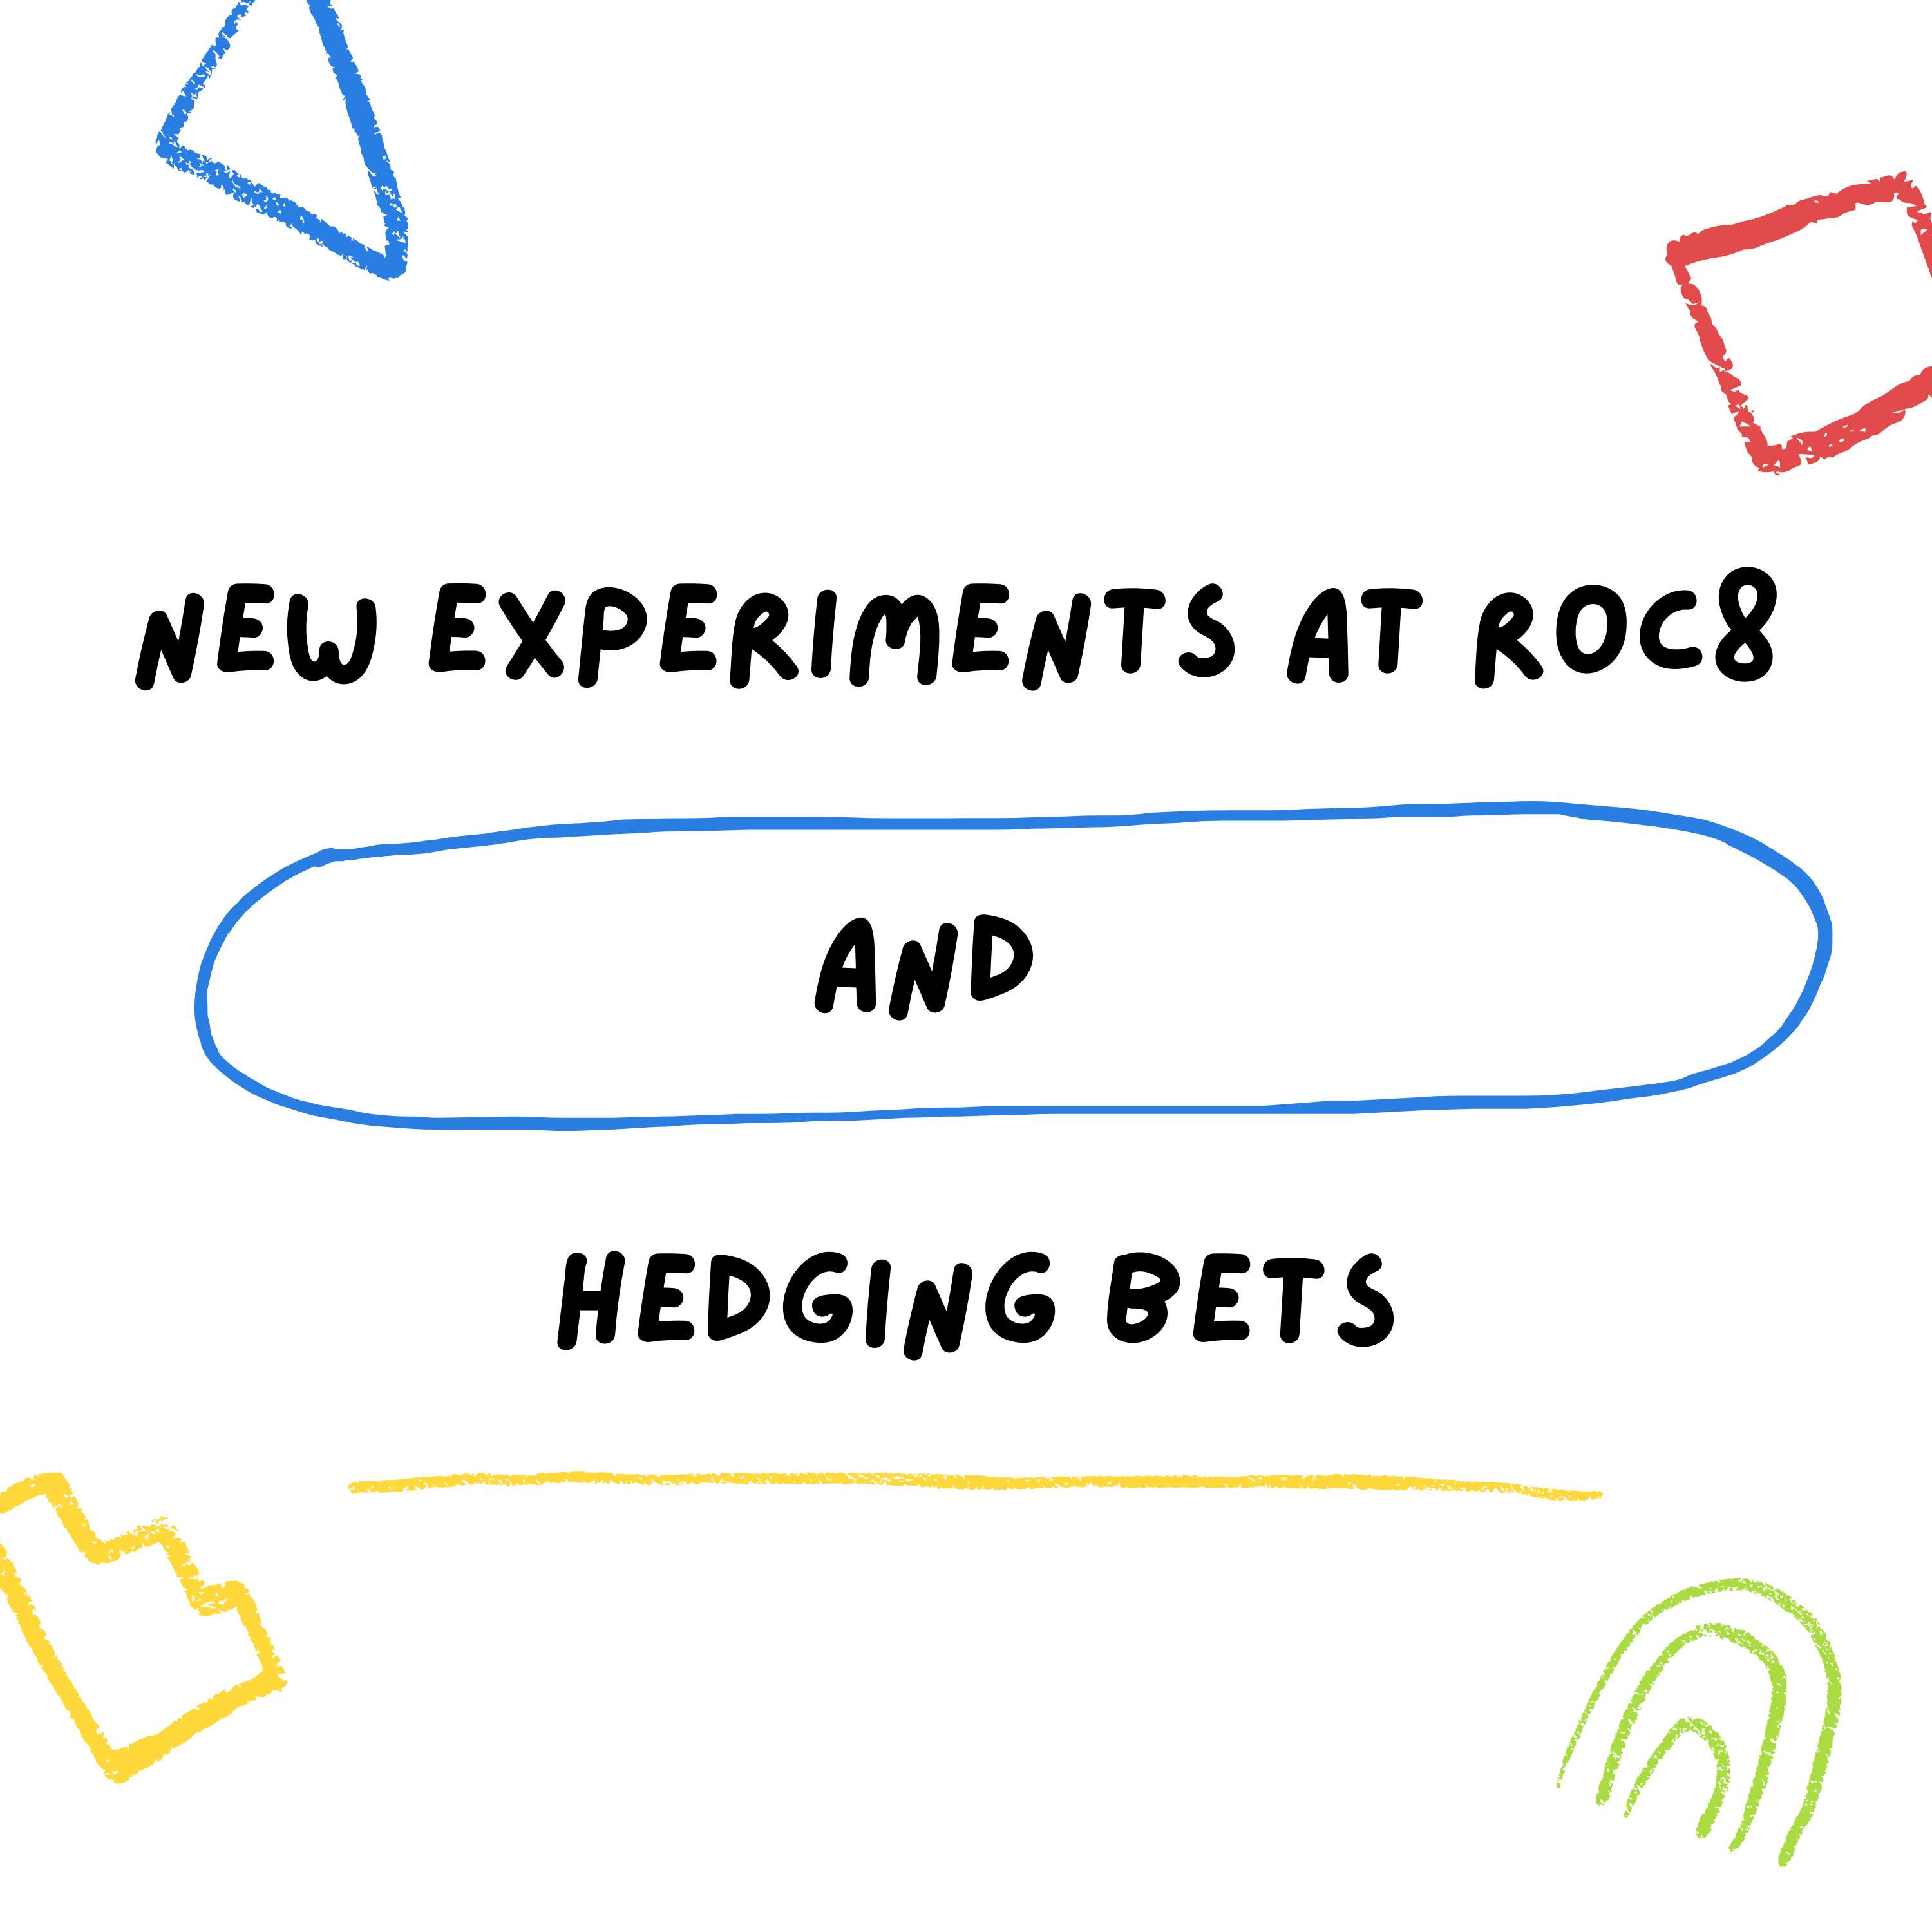 New Experiments at Roc8 and Hedging Bets